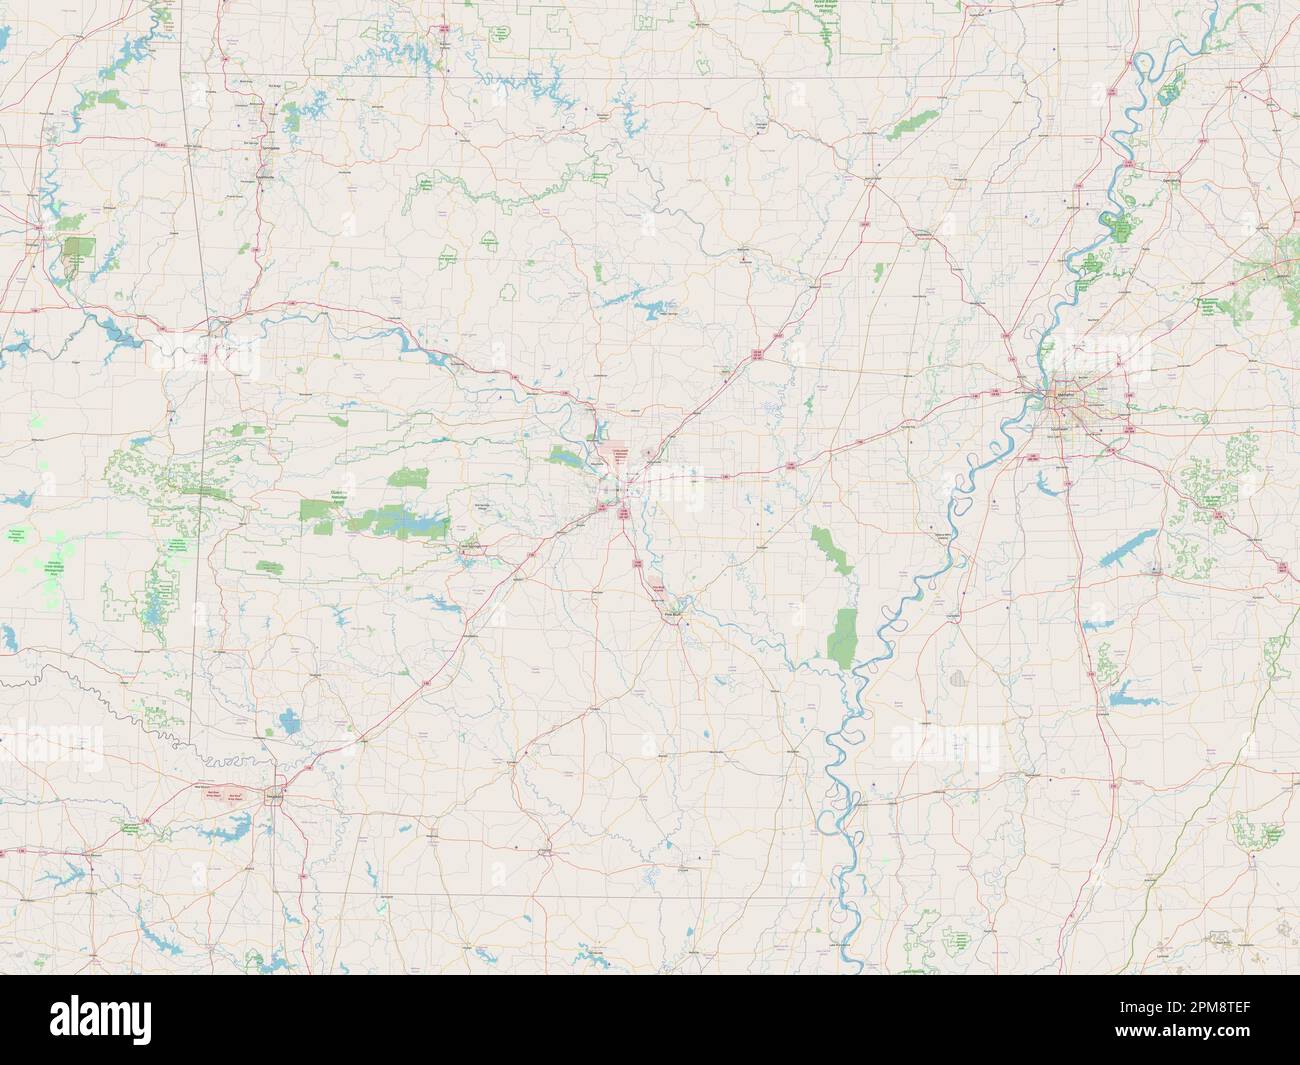 Arkansas, state of United States of America. Open Street Map Stock Photo